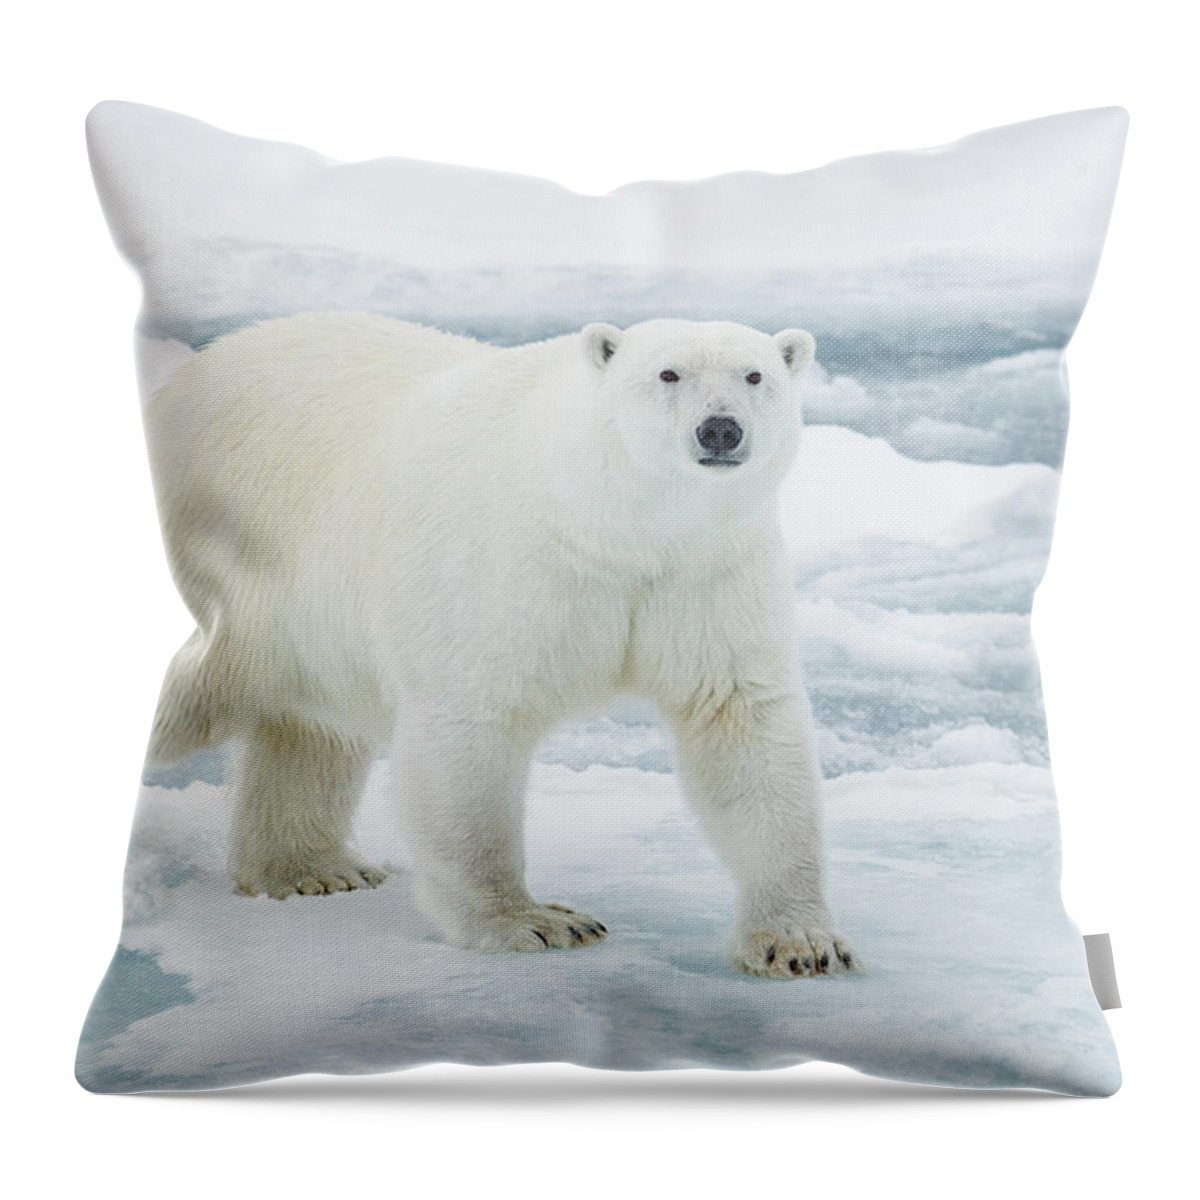 Vertebrate Throw Pillow featuring the photograph Polar Bear On Pack Ice by Kencanning